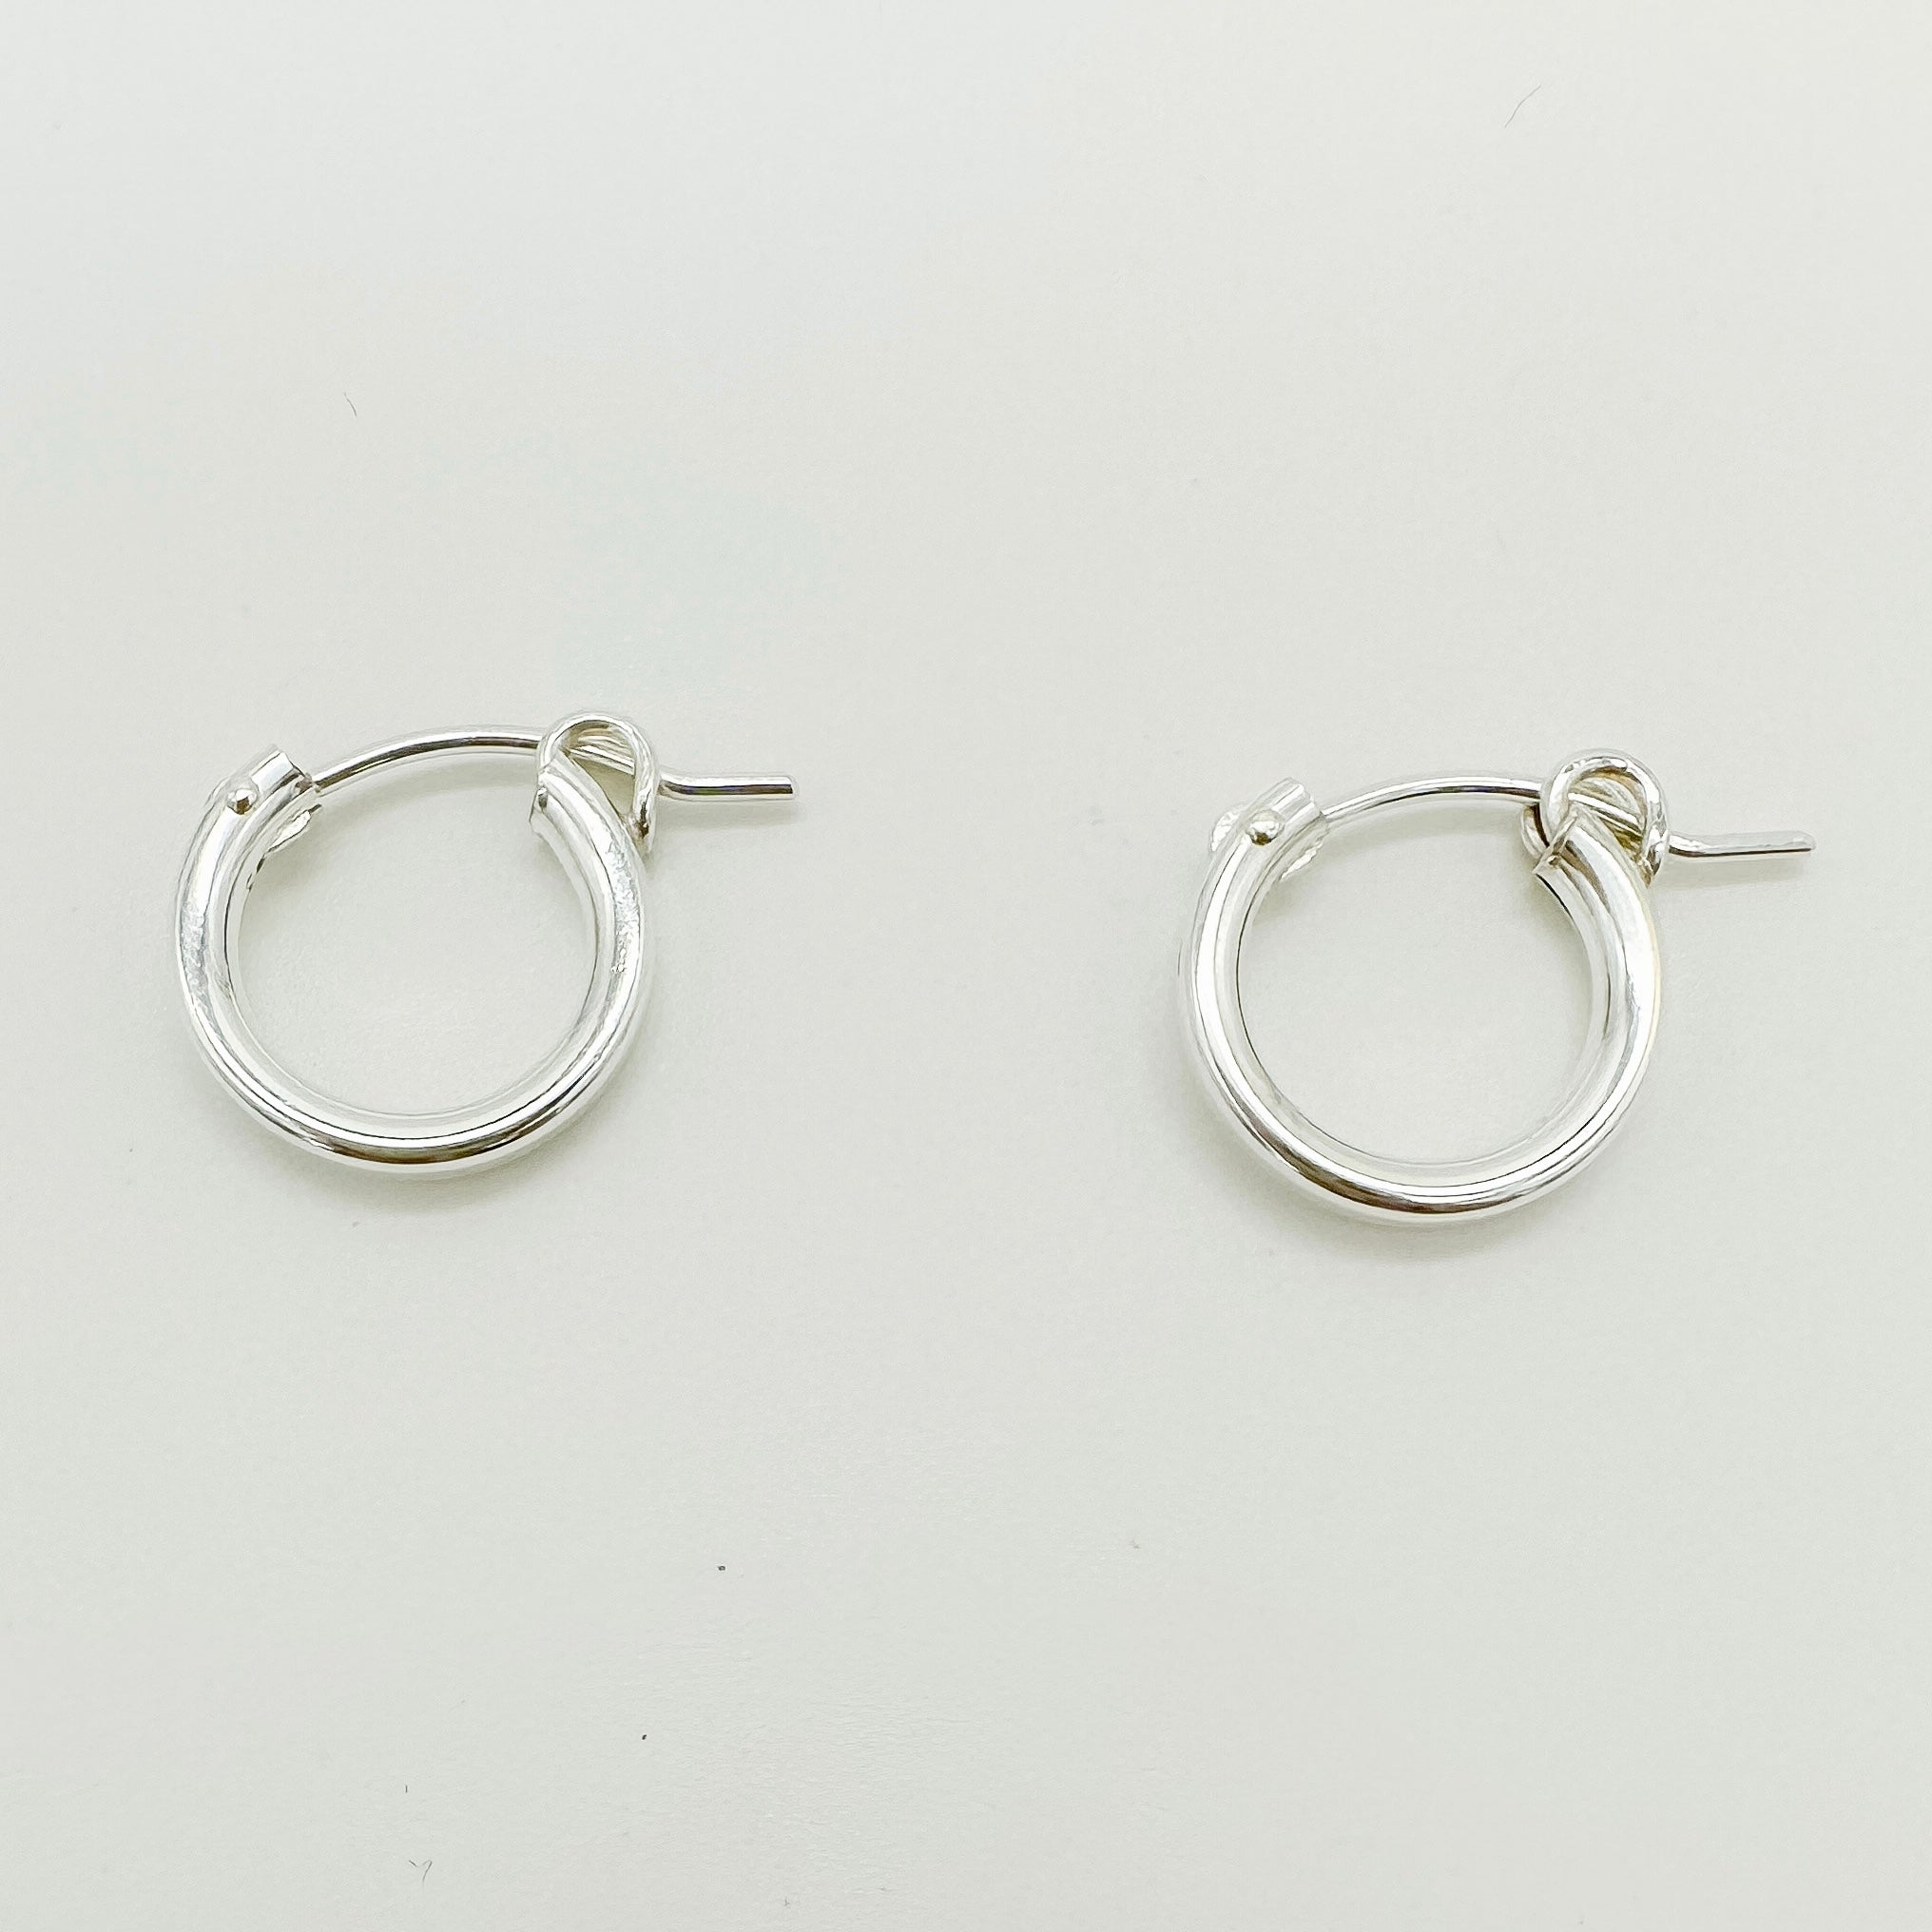 sterling silver everyday hoops / essbe jewelry supply / hoops for everyday / sterling silver hoop earrings